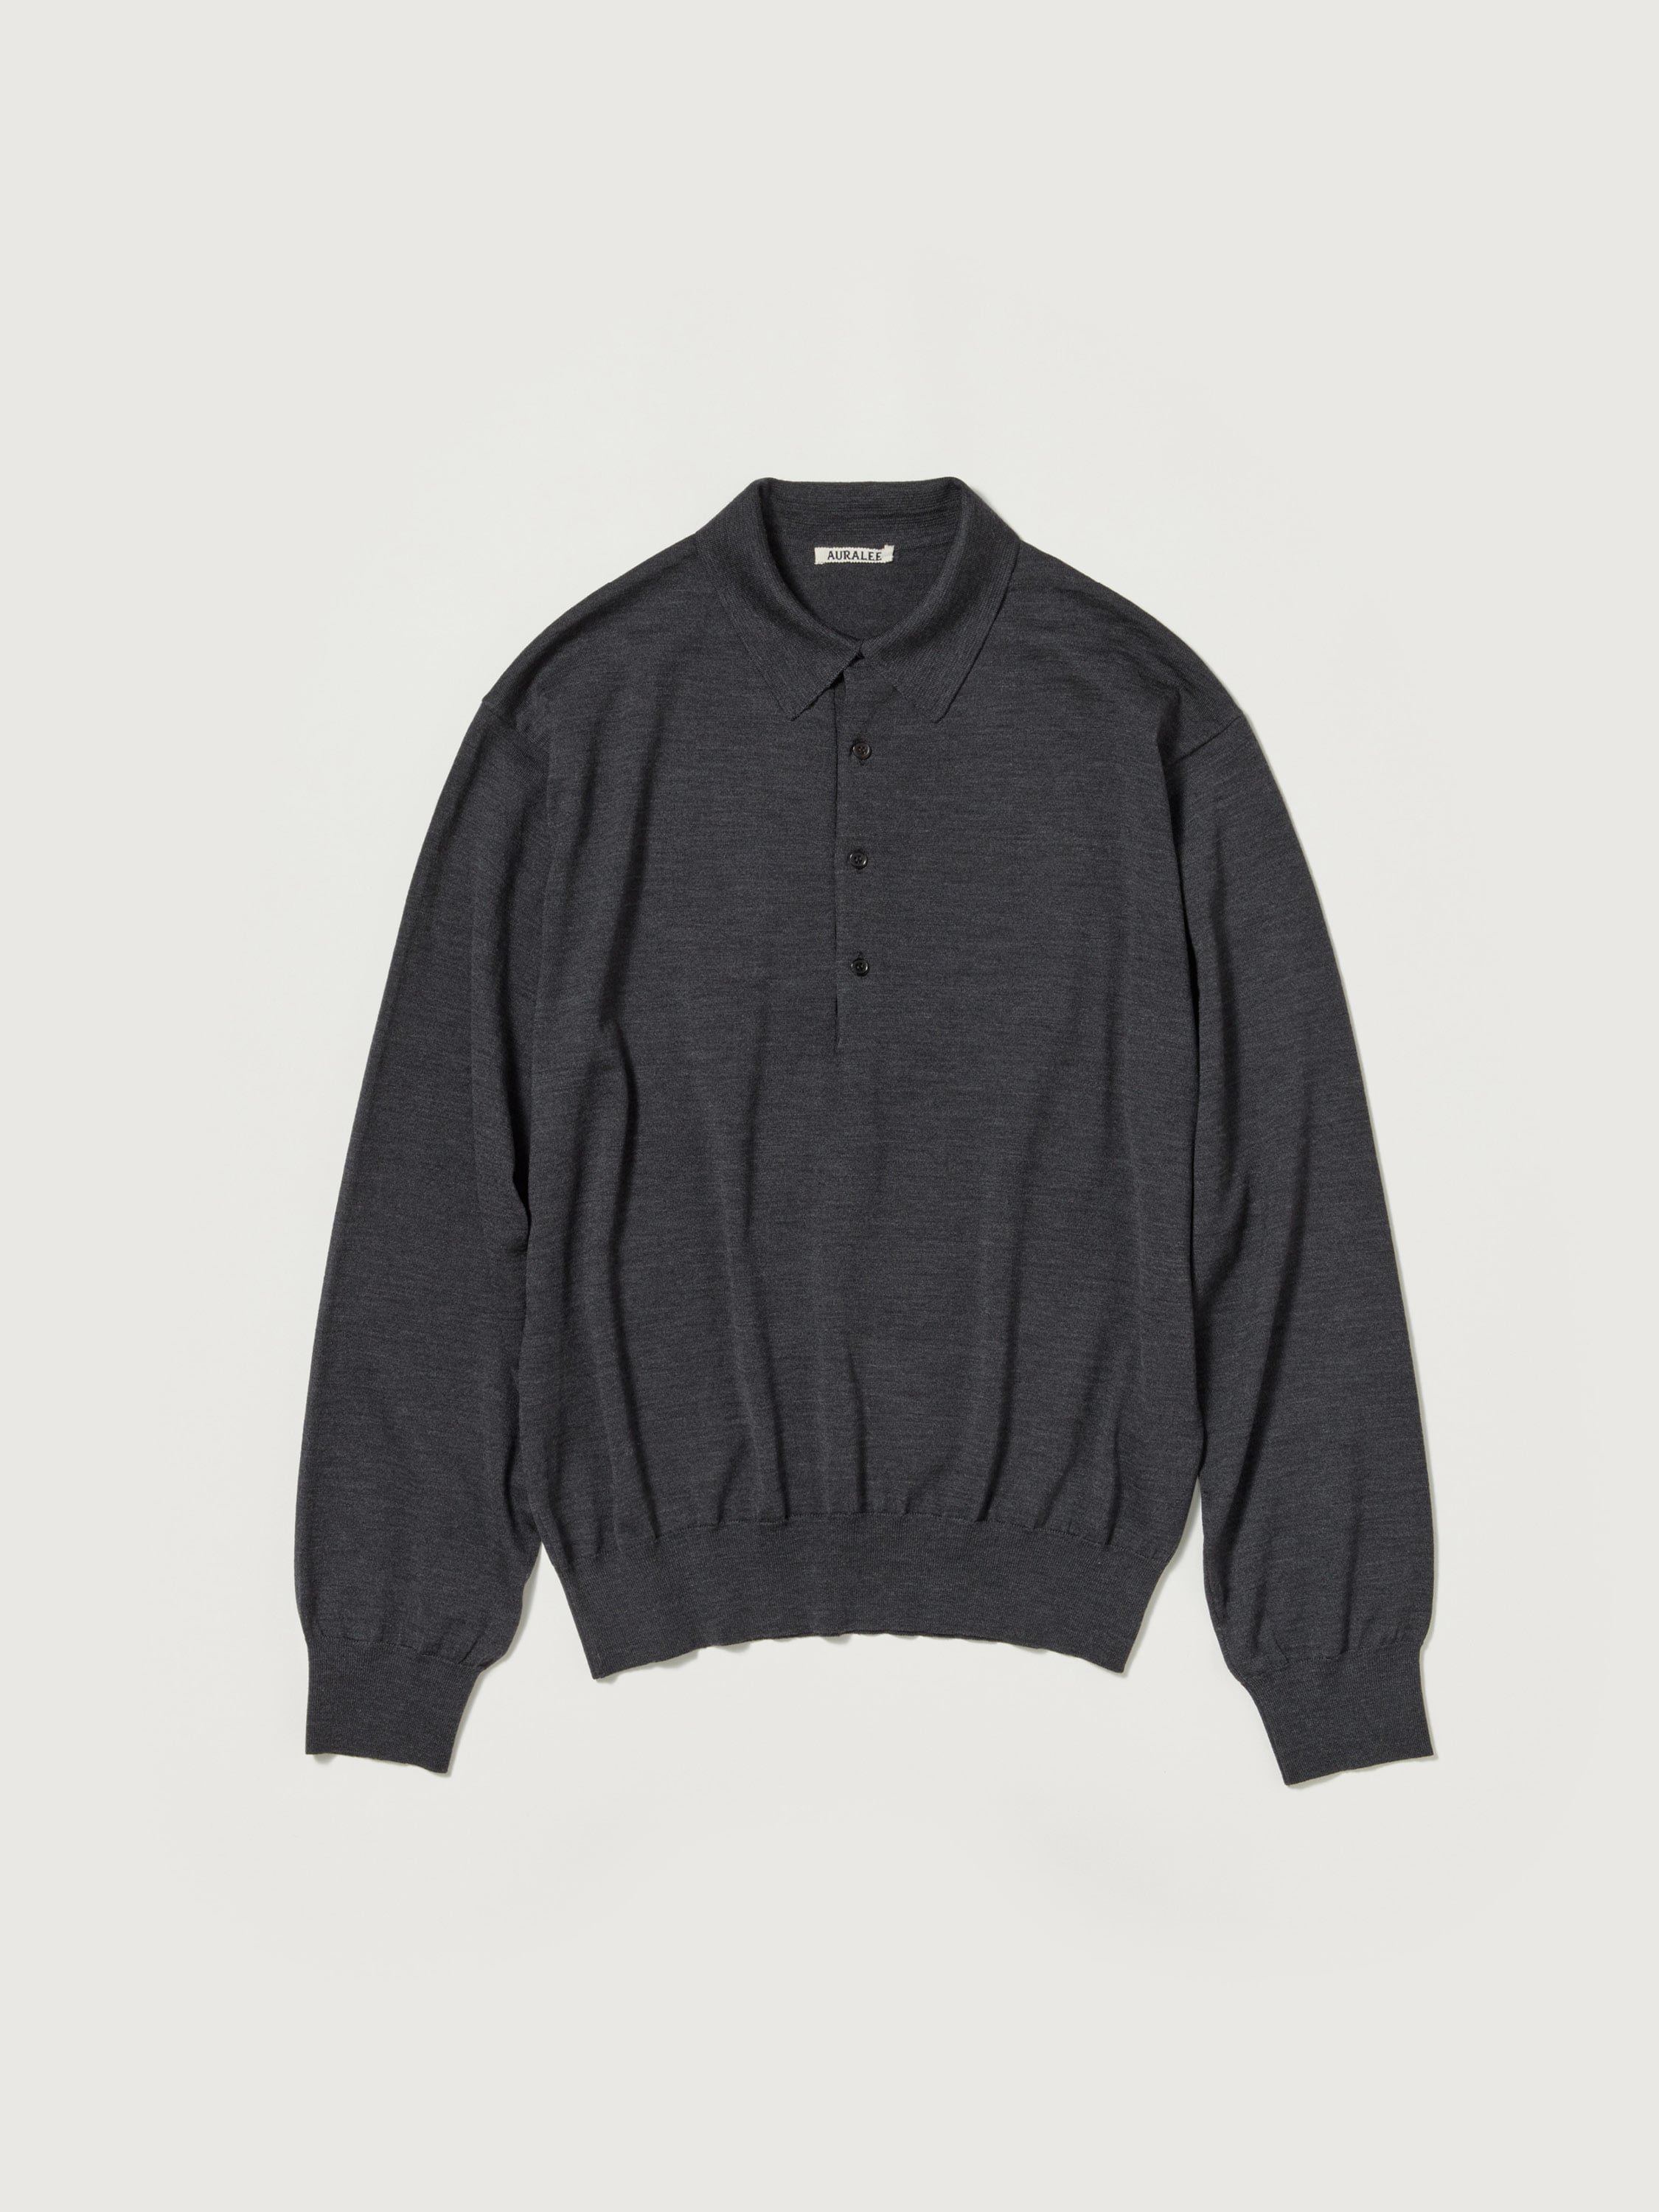 SUPER HIGH GAUGE WOOL KNIT POLO 詳細画像 TOP CHARCOAL 4